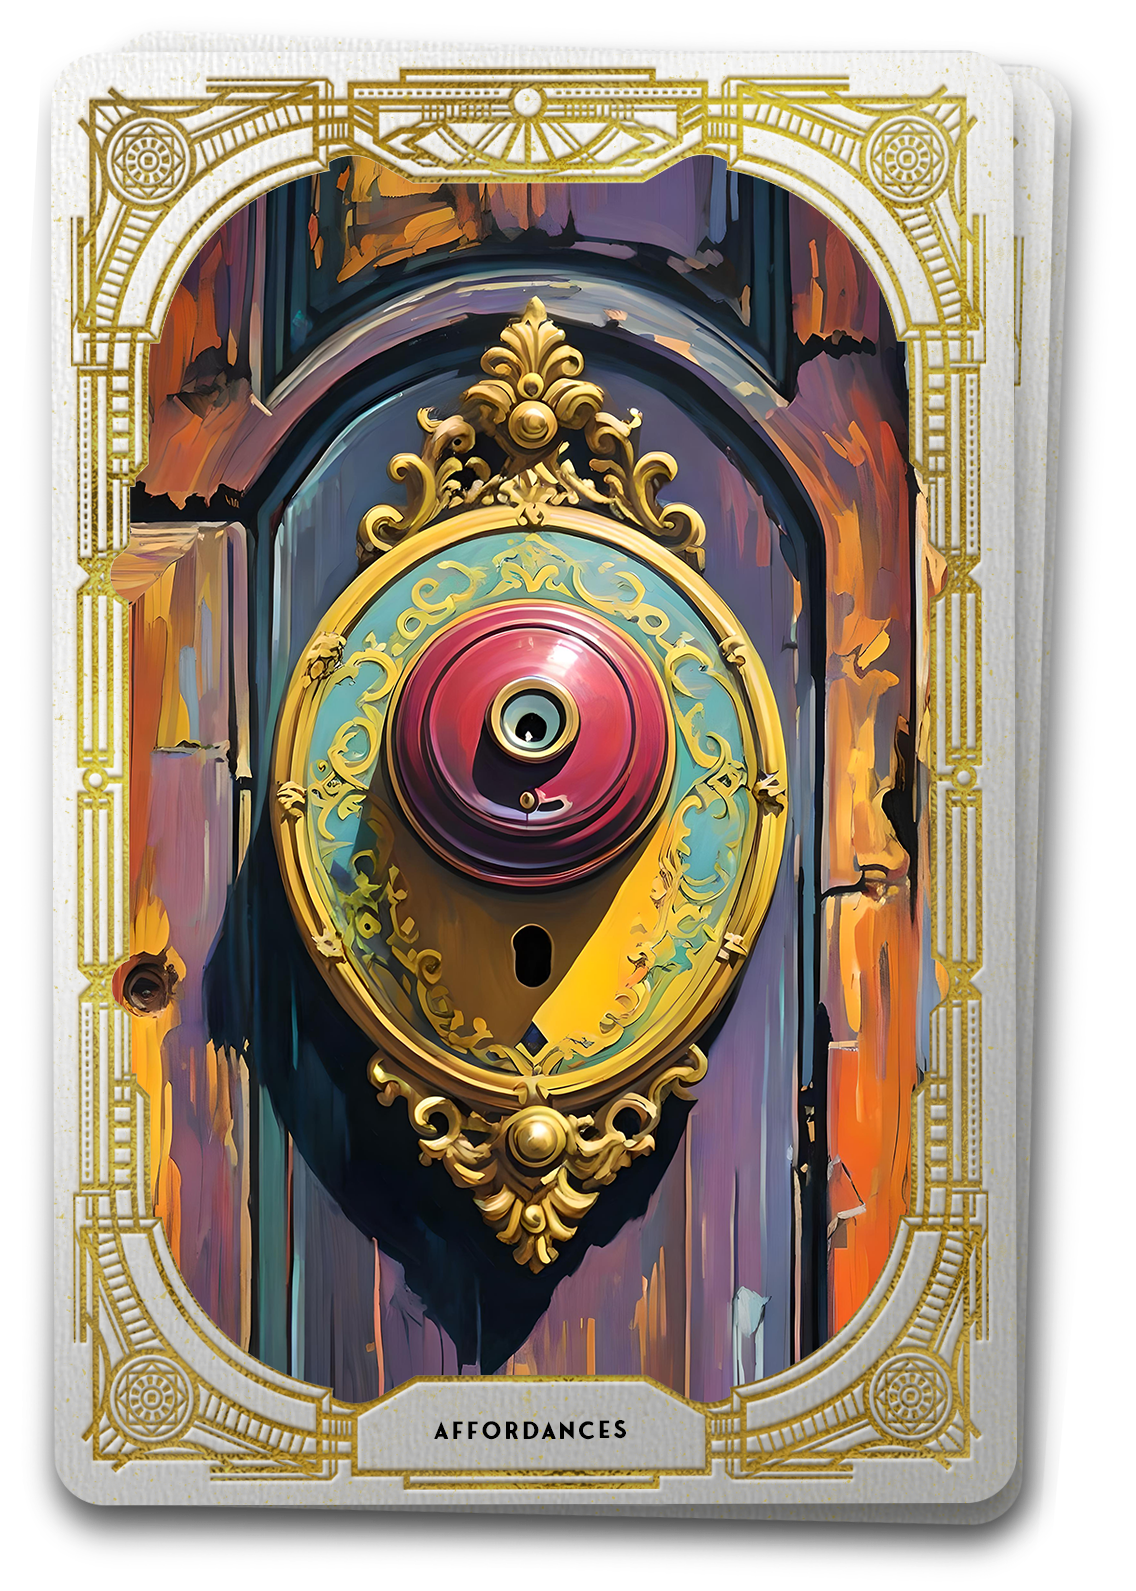 A tarot card with the illustration of an ornate doorknob symbolic of the concept of Affordances is UX design.